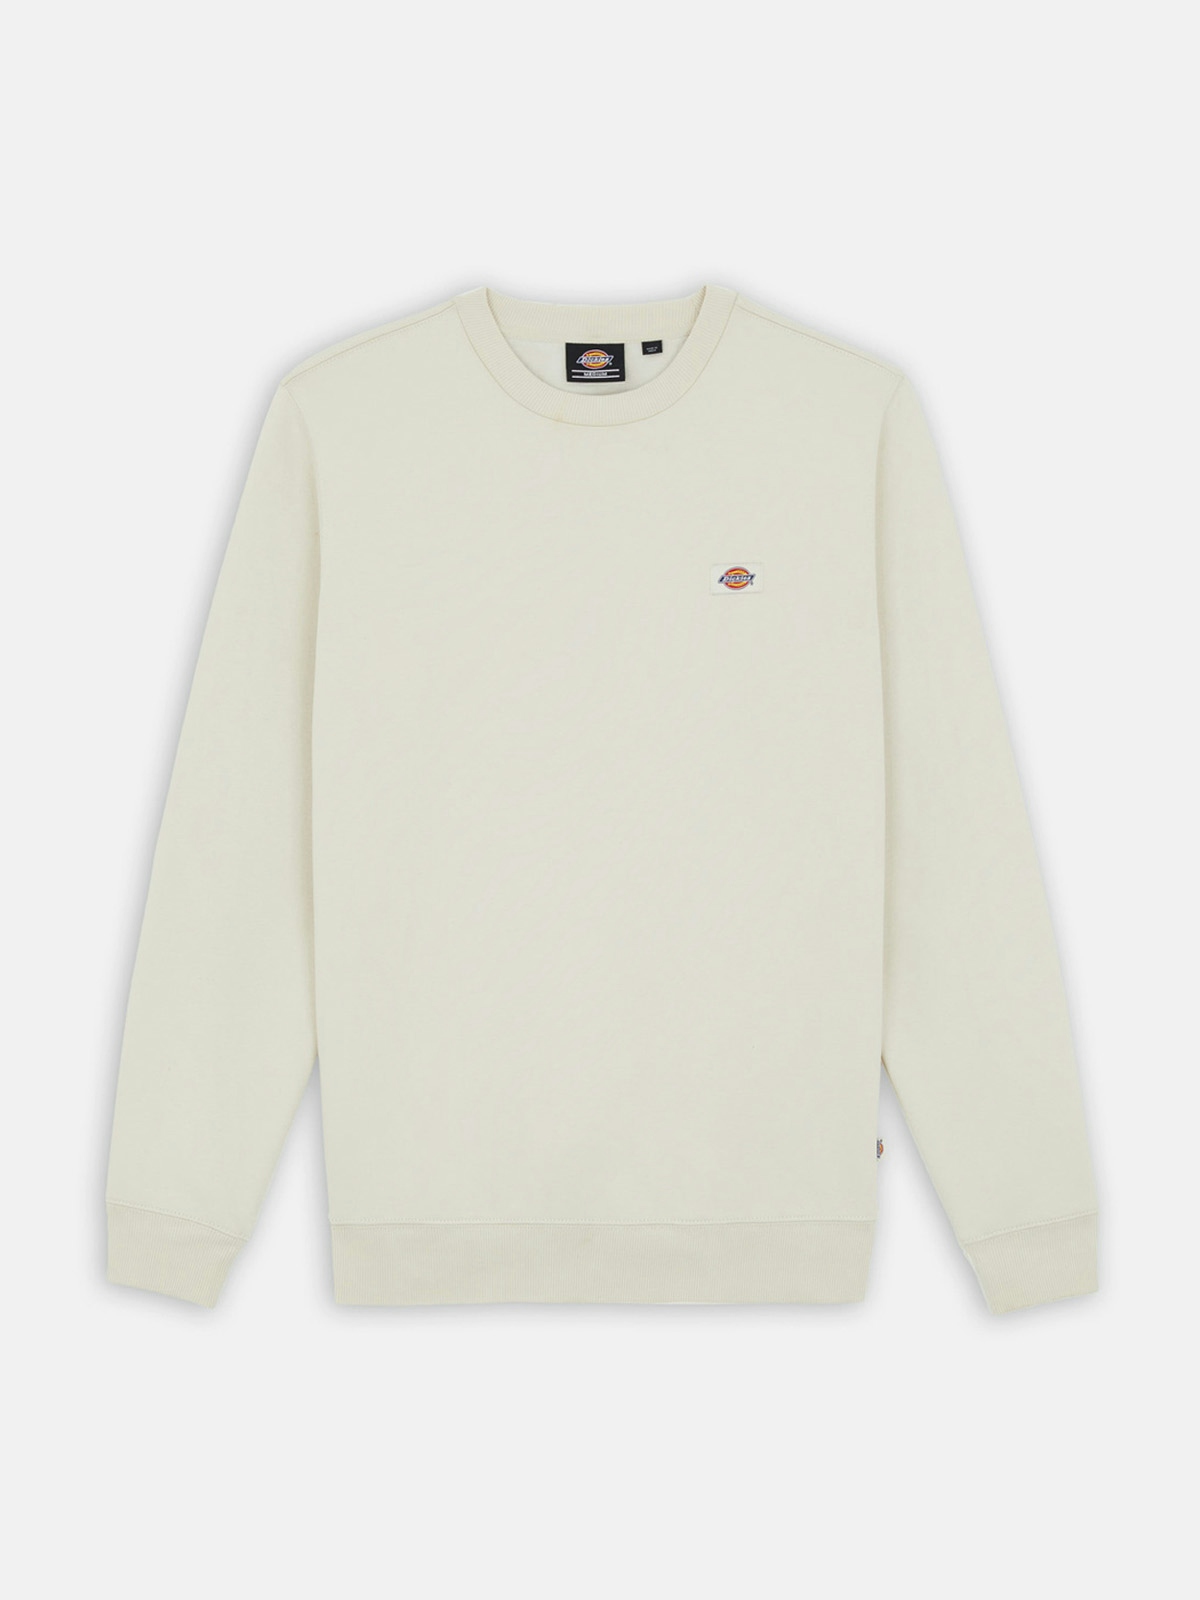 Oakport Sweater